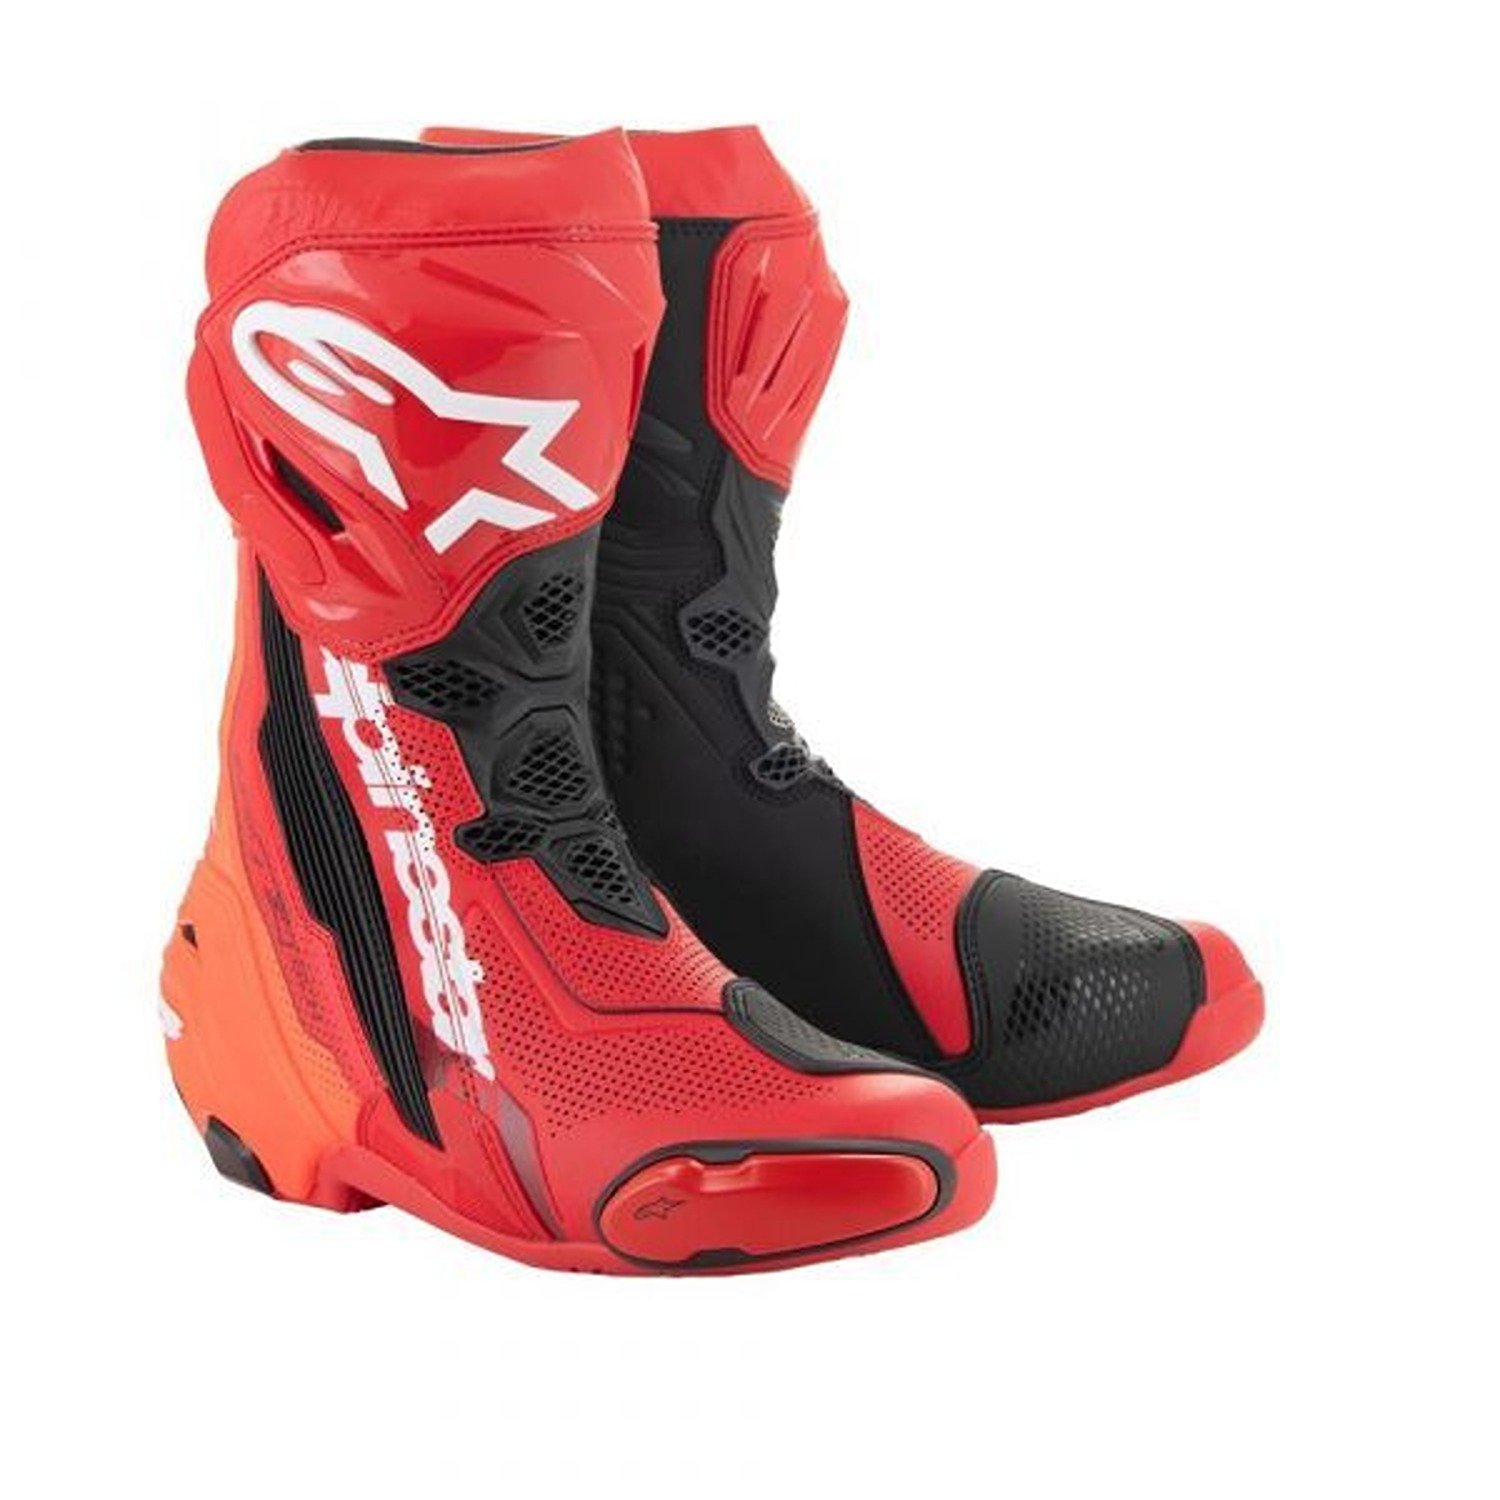 Image of Alpinestars Supertech R Vented Boots Bright Red Fluo Size 45 EN